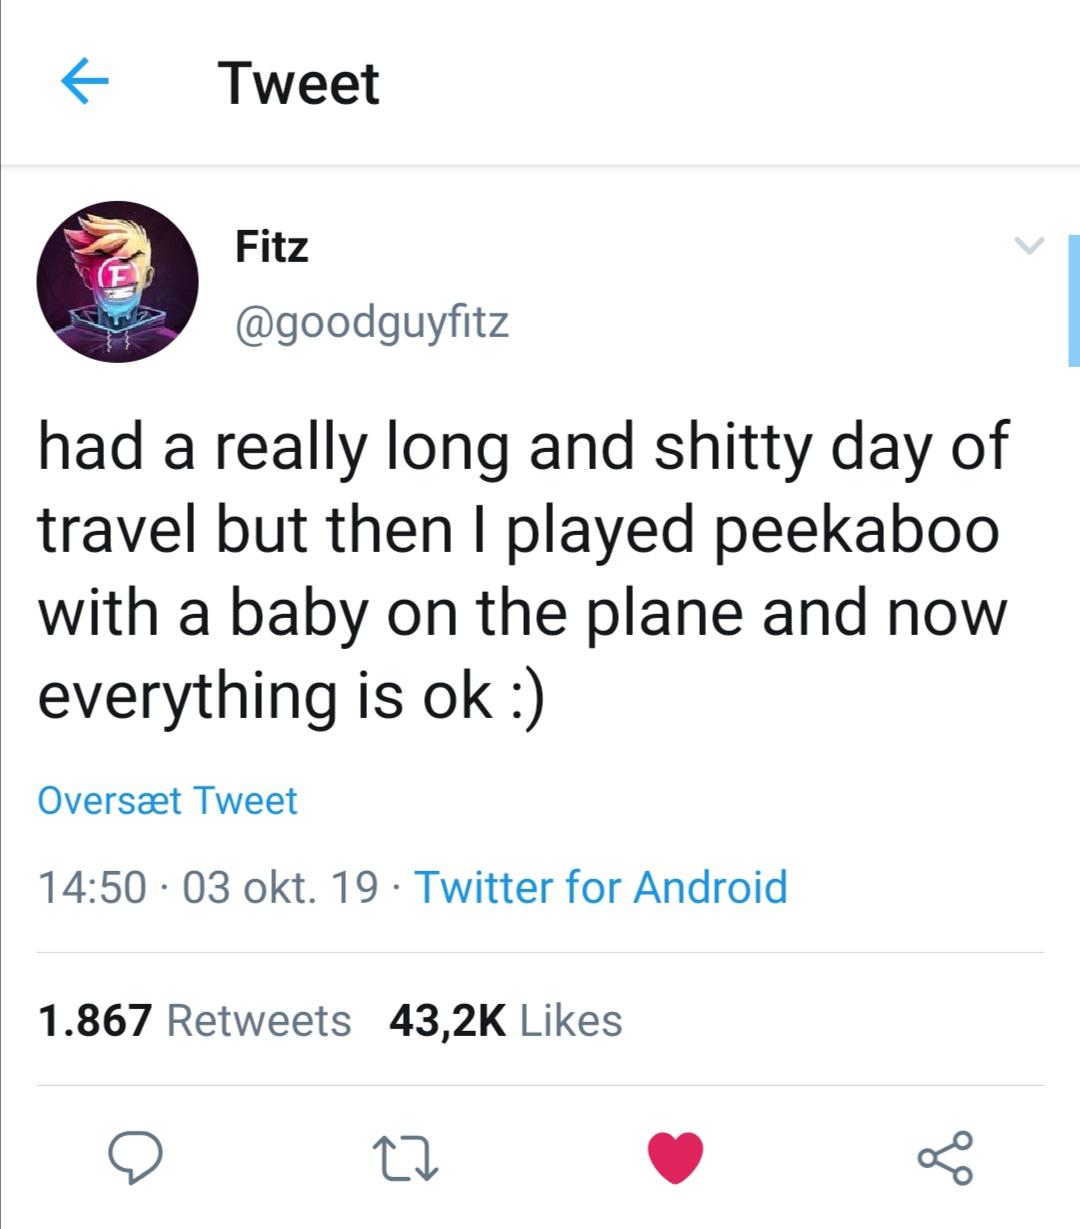 cute wholesome-memes cute text: Tweet Fitz @goodguyfitz had a really long and shitty day of travel but then I played peekaboo with a baby on the plane and now everything is ok :) Oversæt Tweet 14:50 • 03 okt. 19 • Twitter for Android 43,2K Likes 1.867 Retweets 